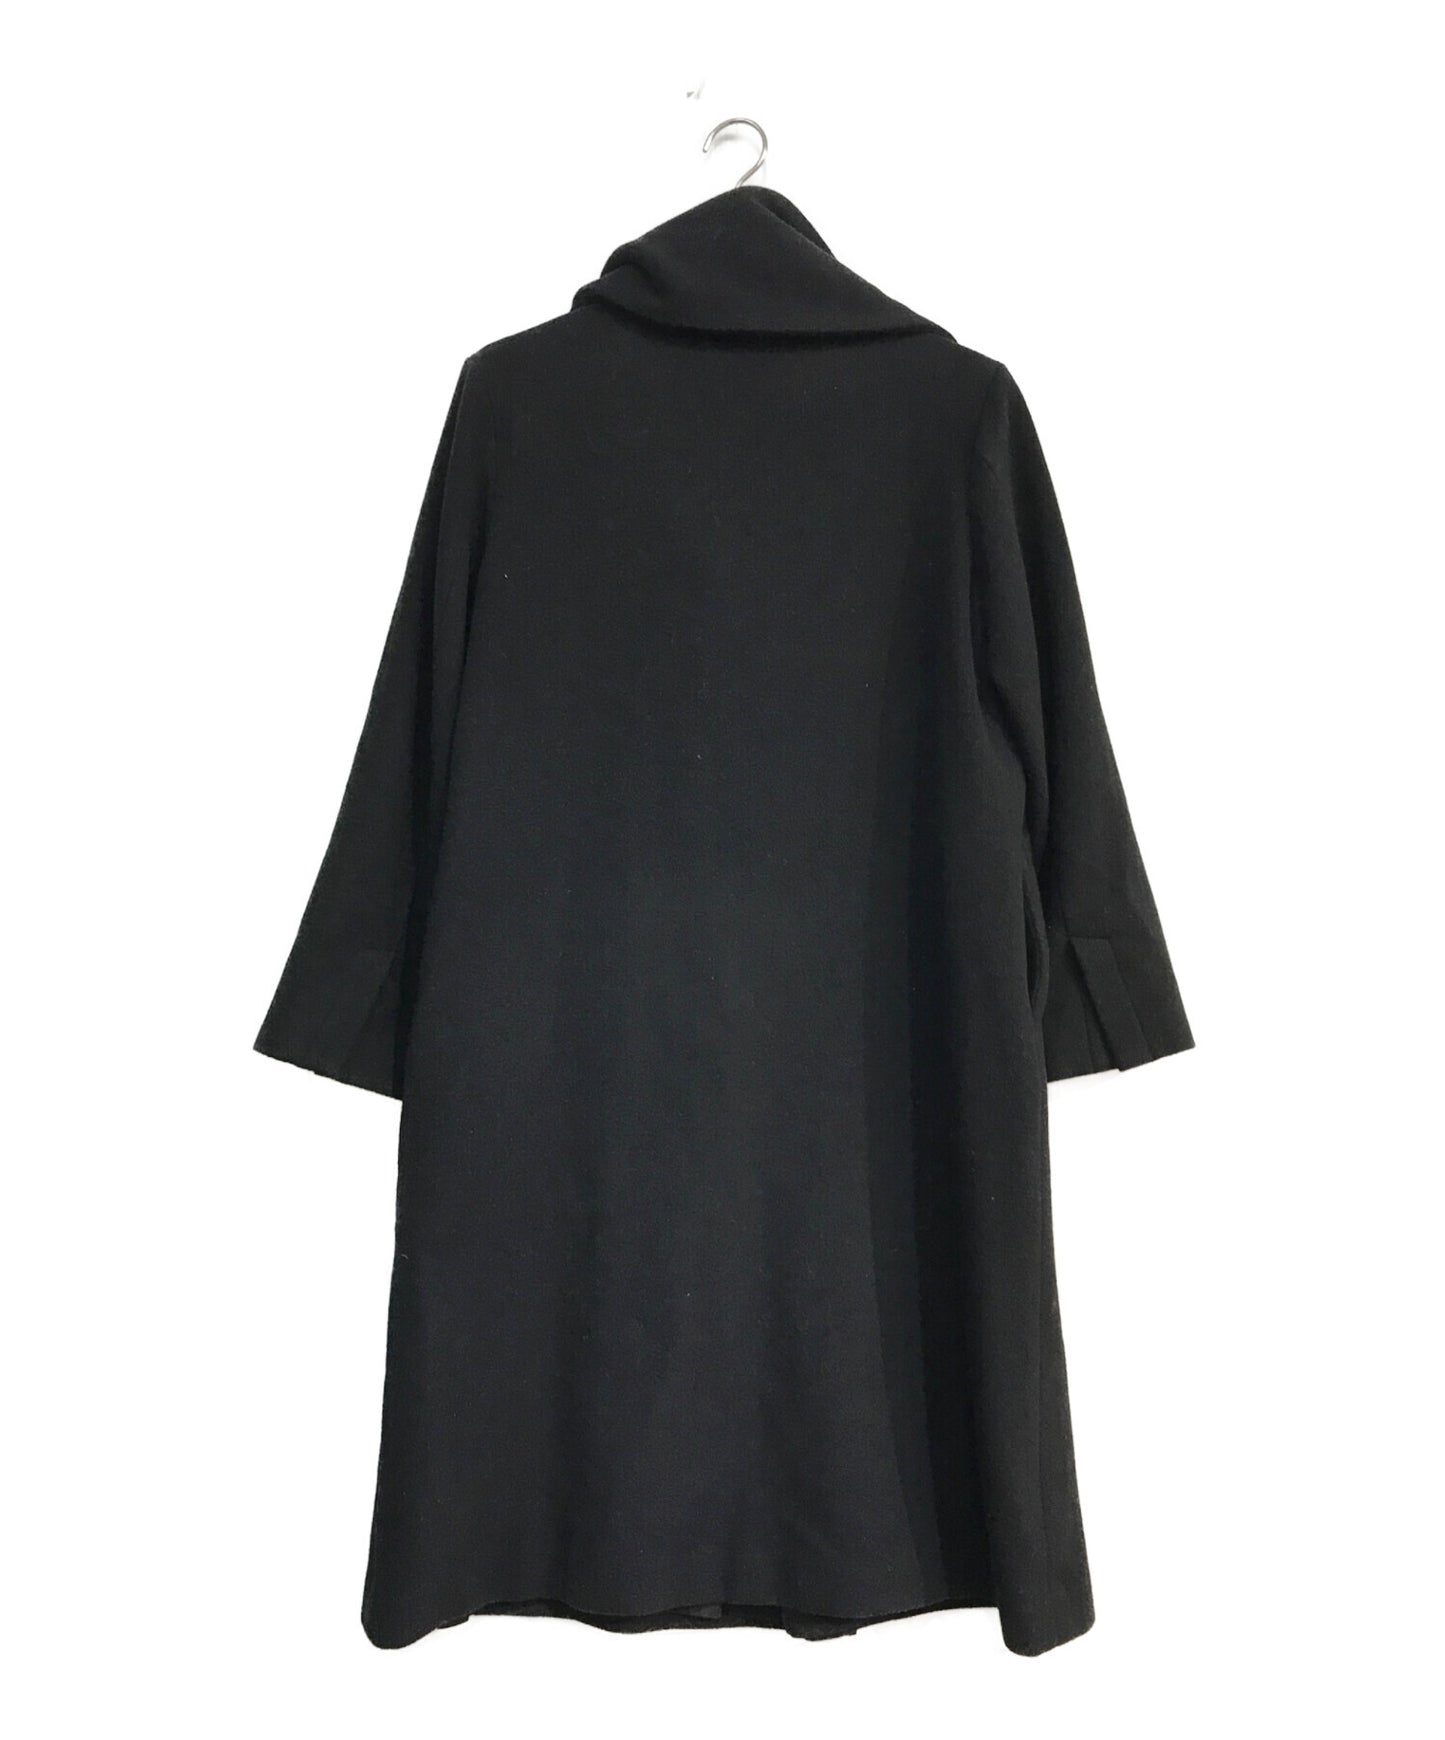 [Pre-owned] LIMI feu Wool Mossa Coat with Stole LE-C04-102 LE-C04-102